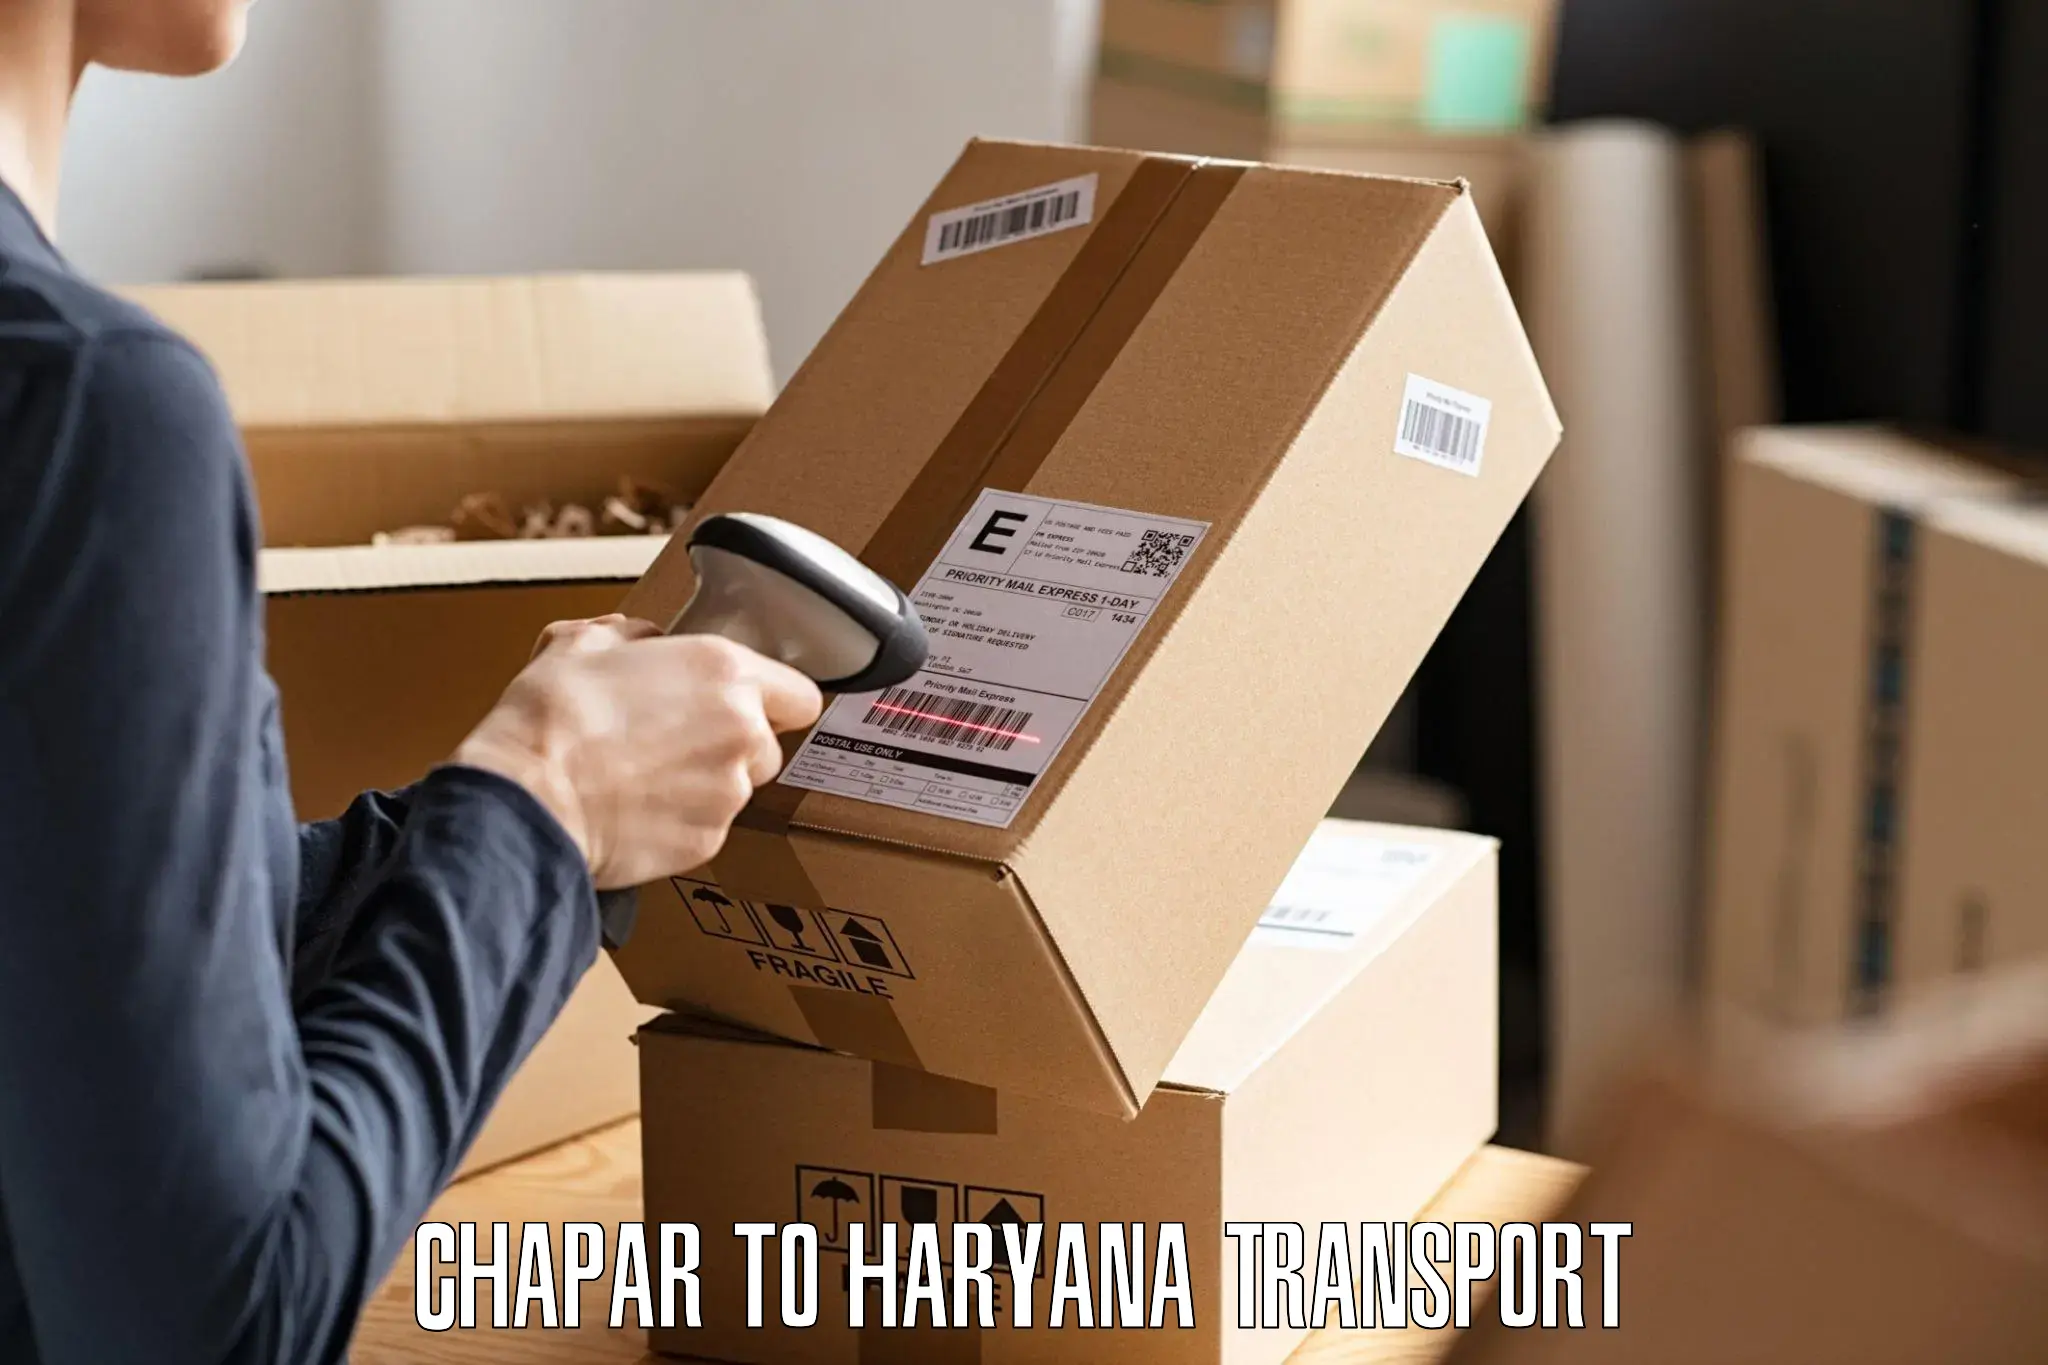 Container transport service Chapar to Haryana